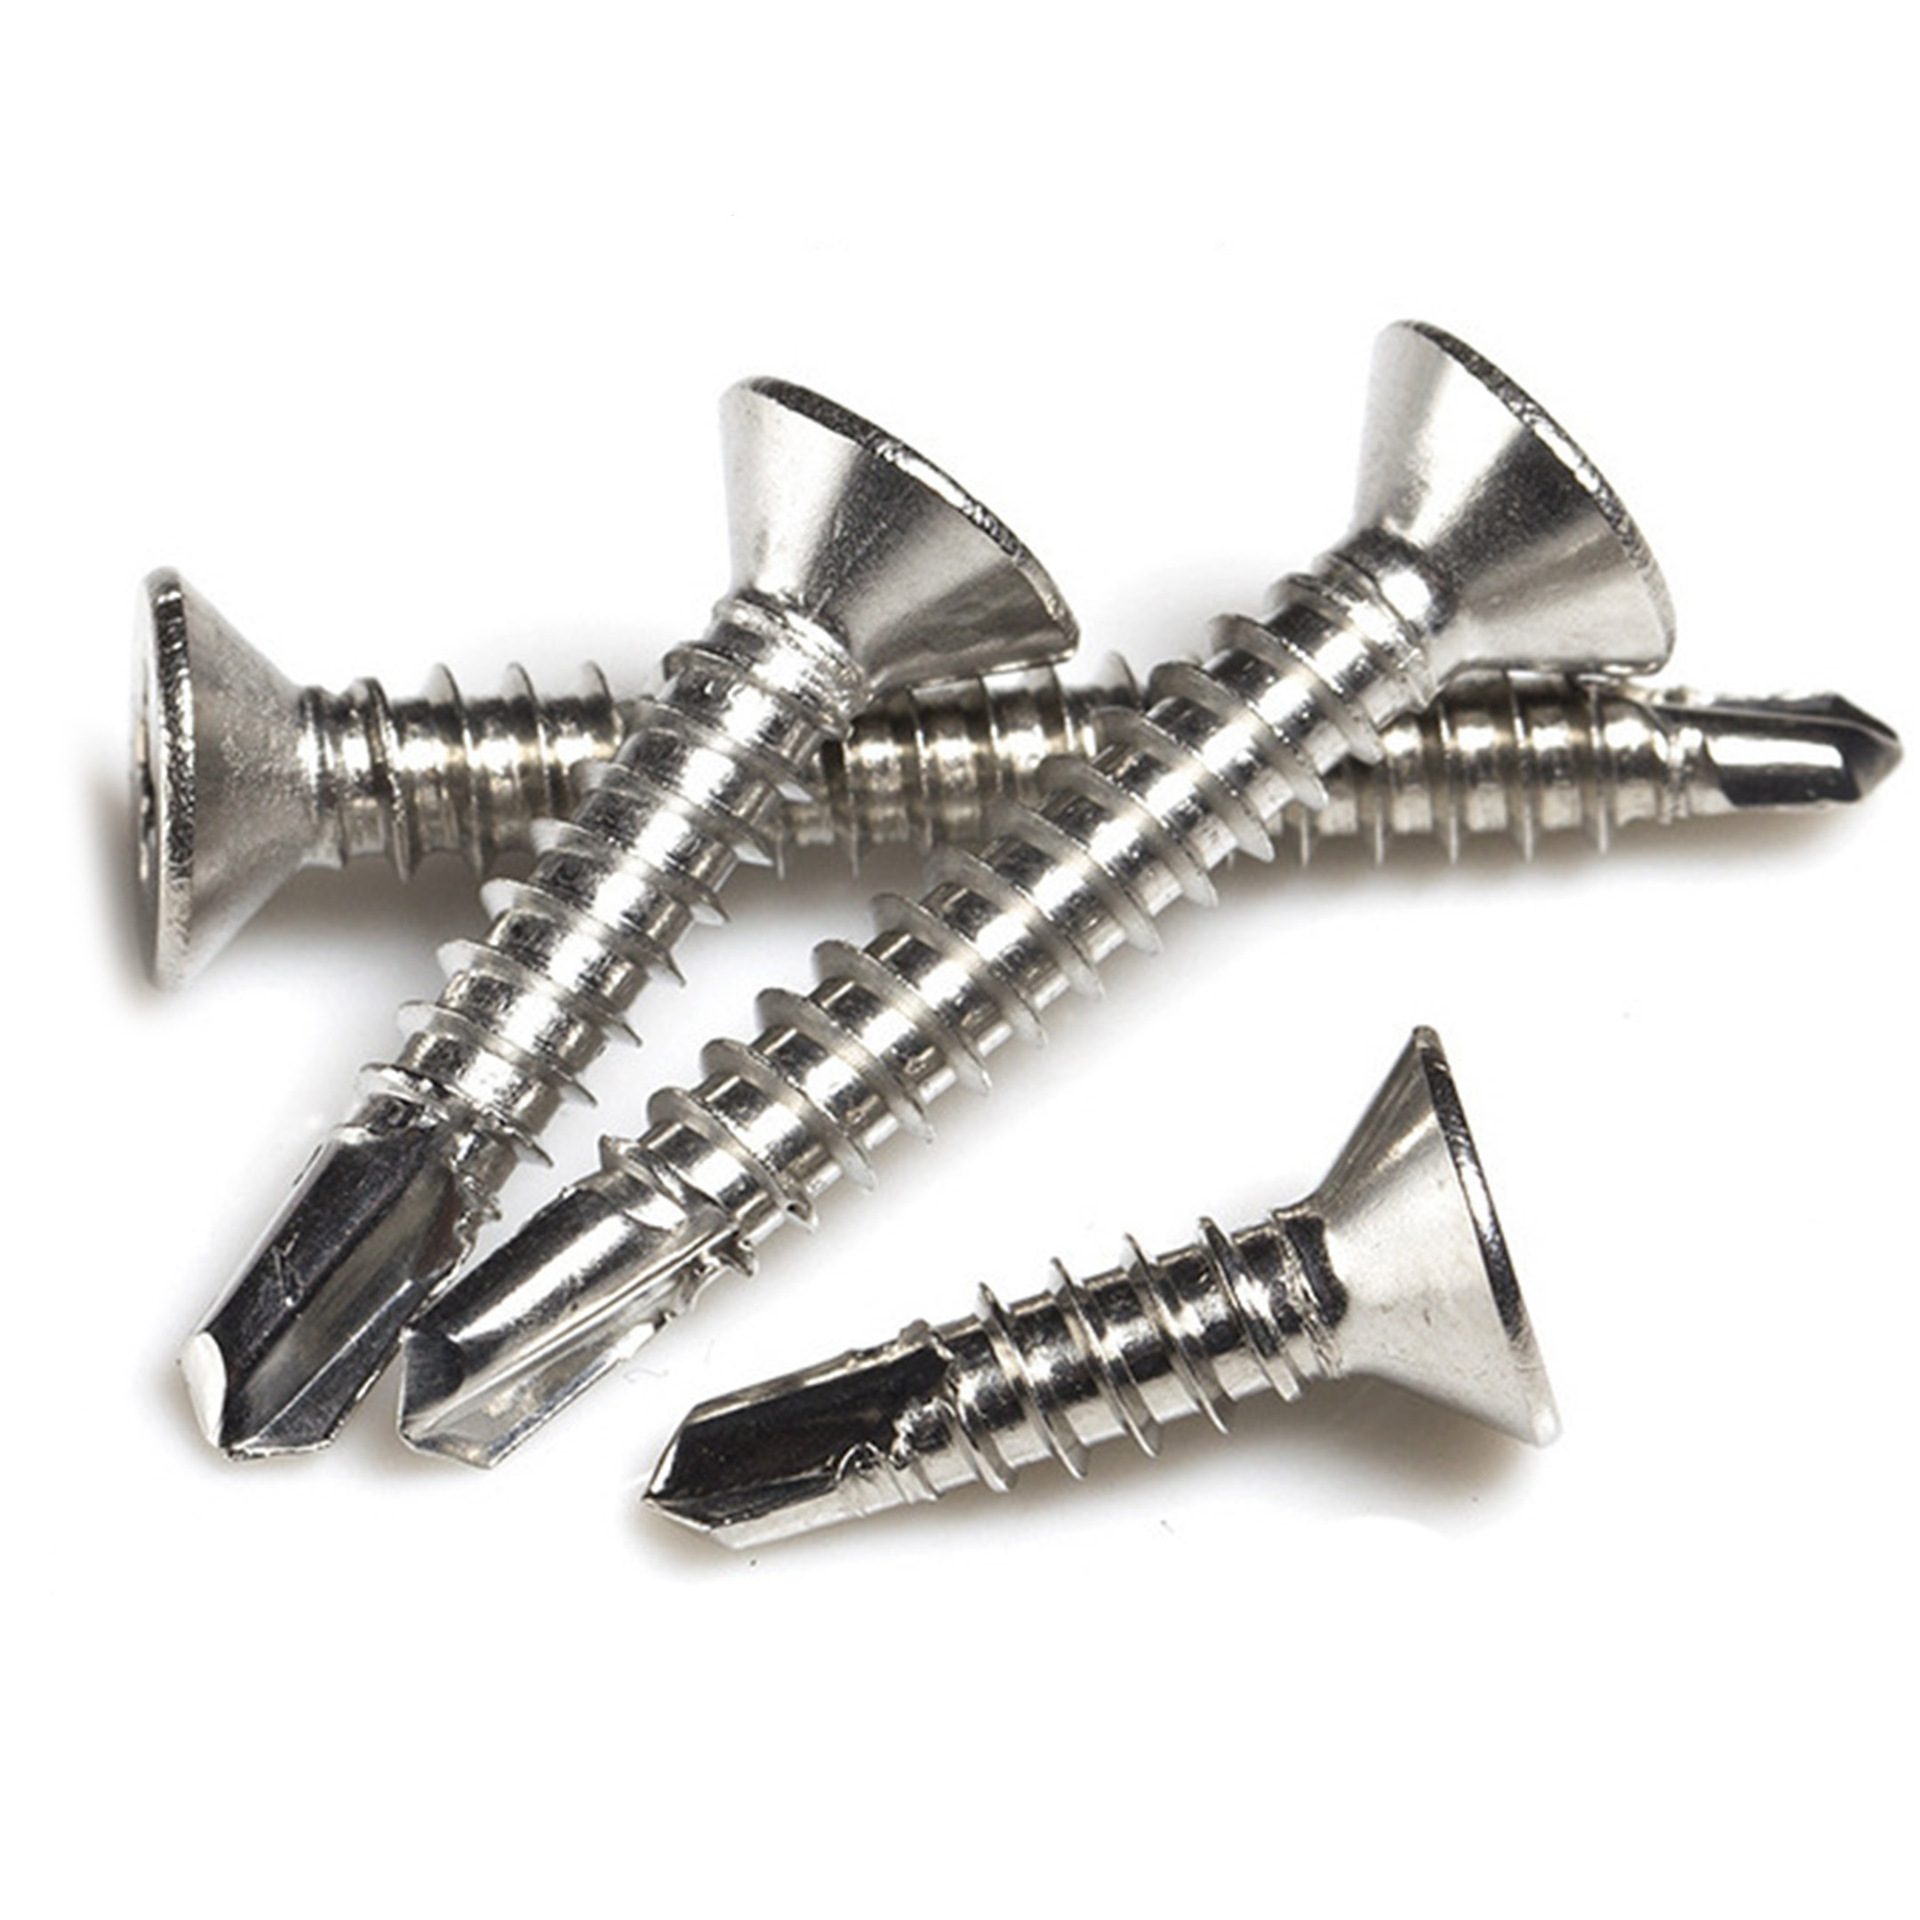 M5.5 304 Stainless Steel Phillips Flat Head Drilling Self-Tapping Screws